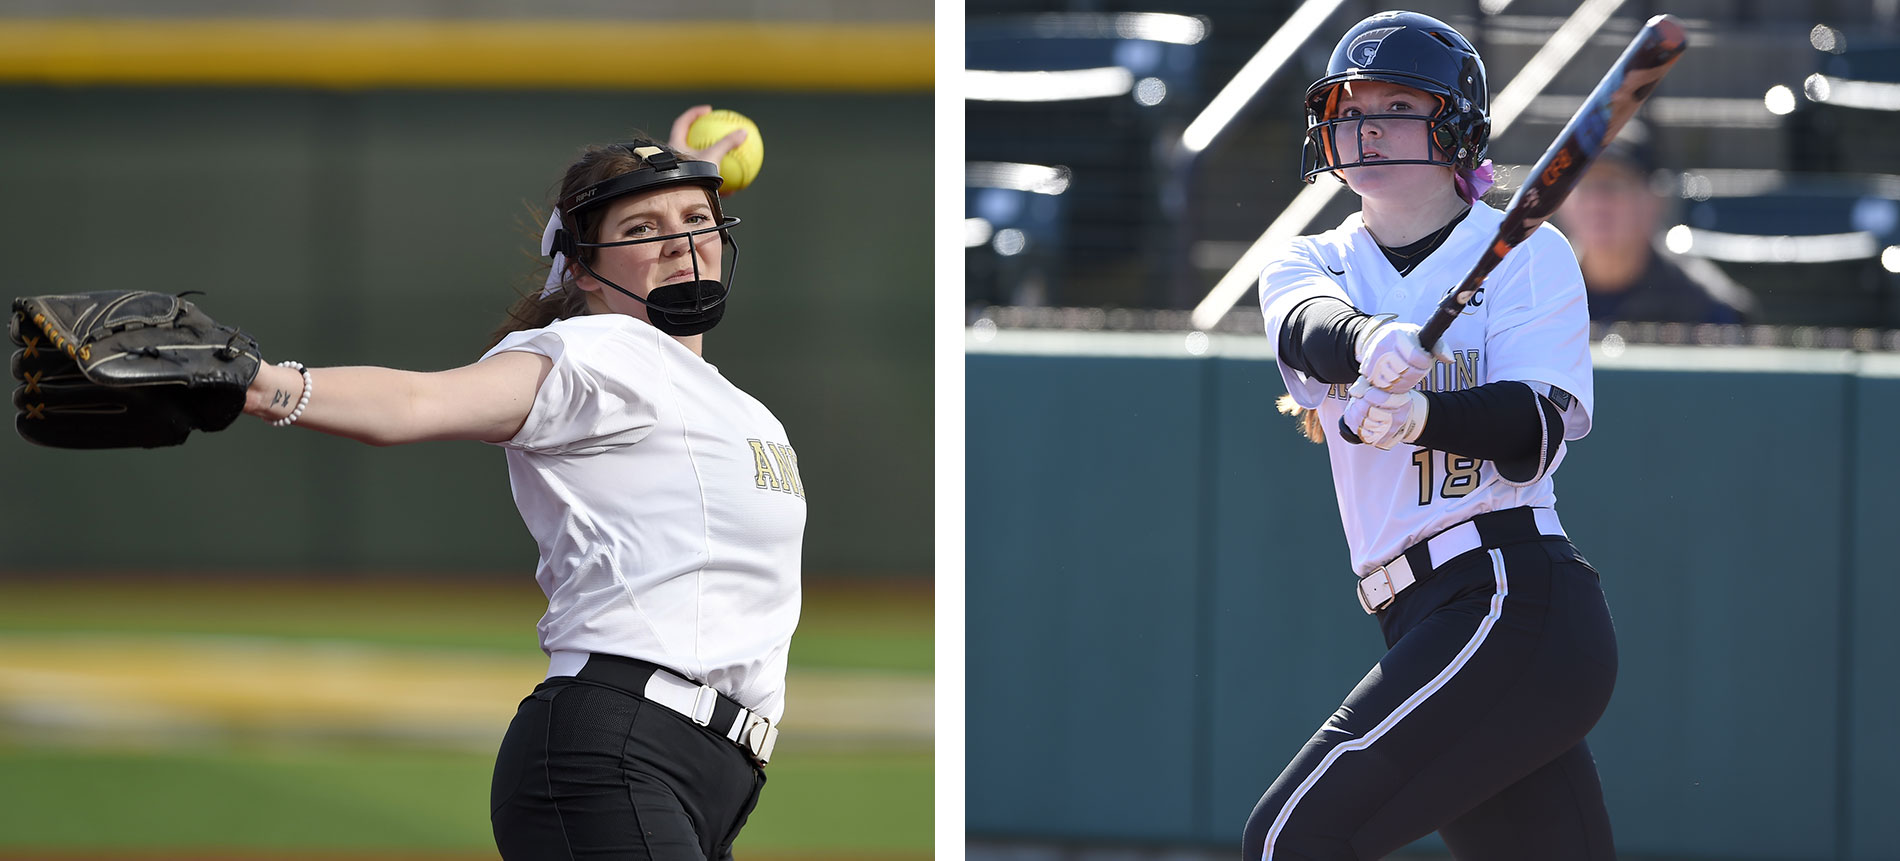 Trojans Sweep SAC AstroTurf Softball Player and Pitcher of the Week Honors